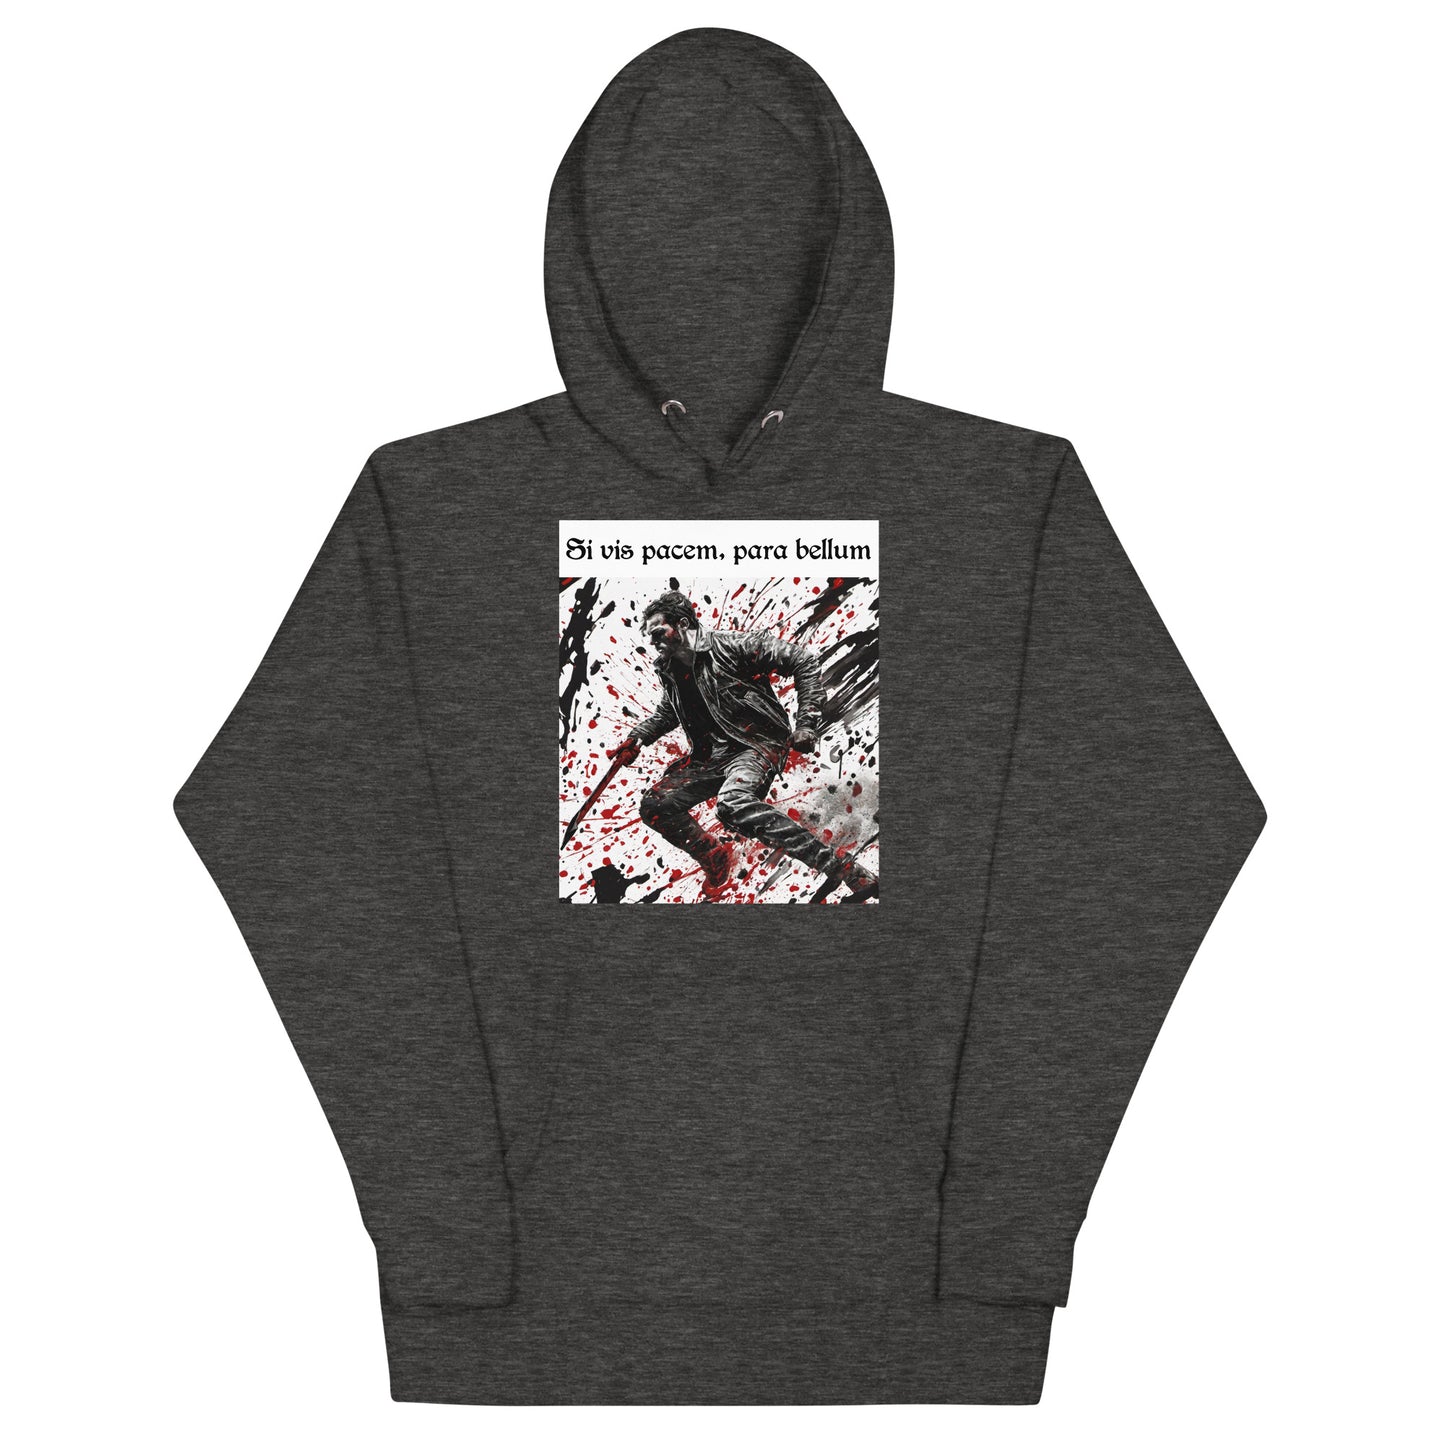 If You Want Peace, Prepare for War Men's Hoodie Charcoal Heather